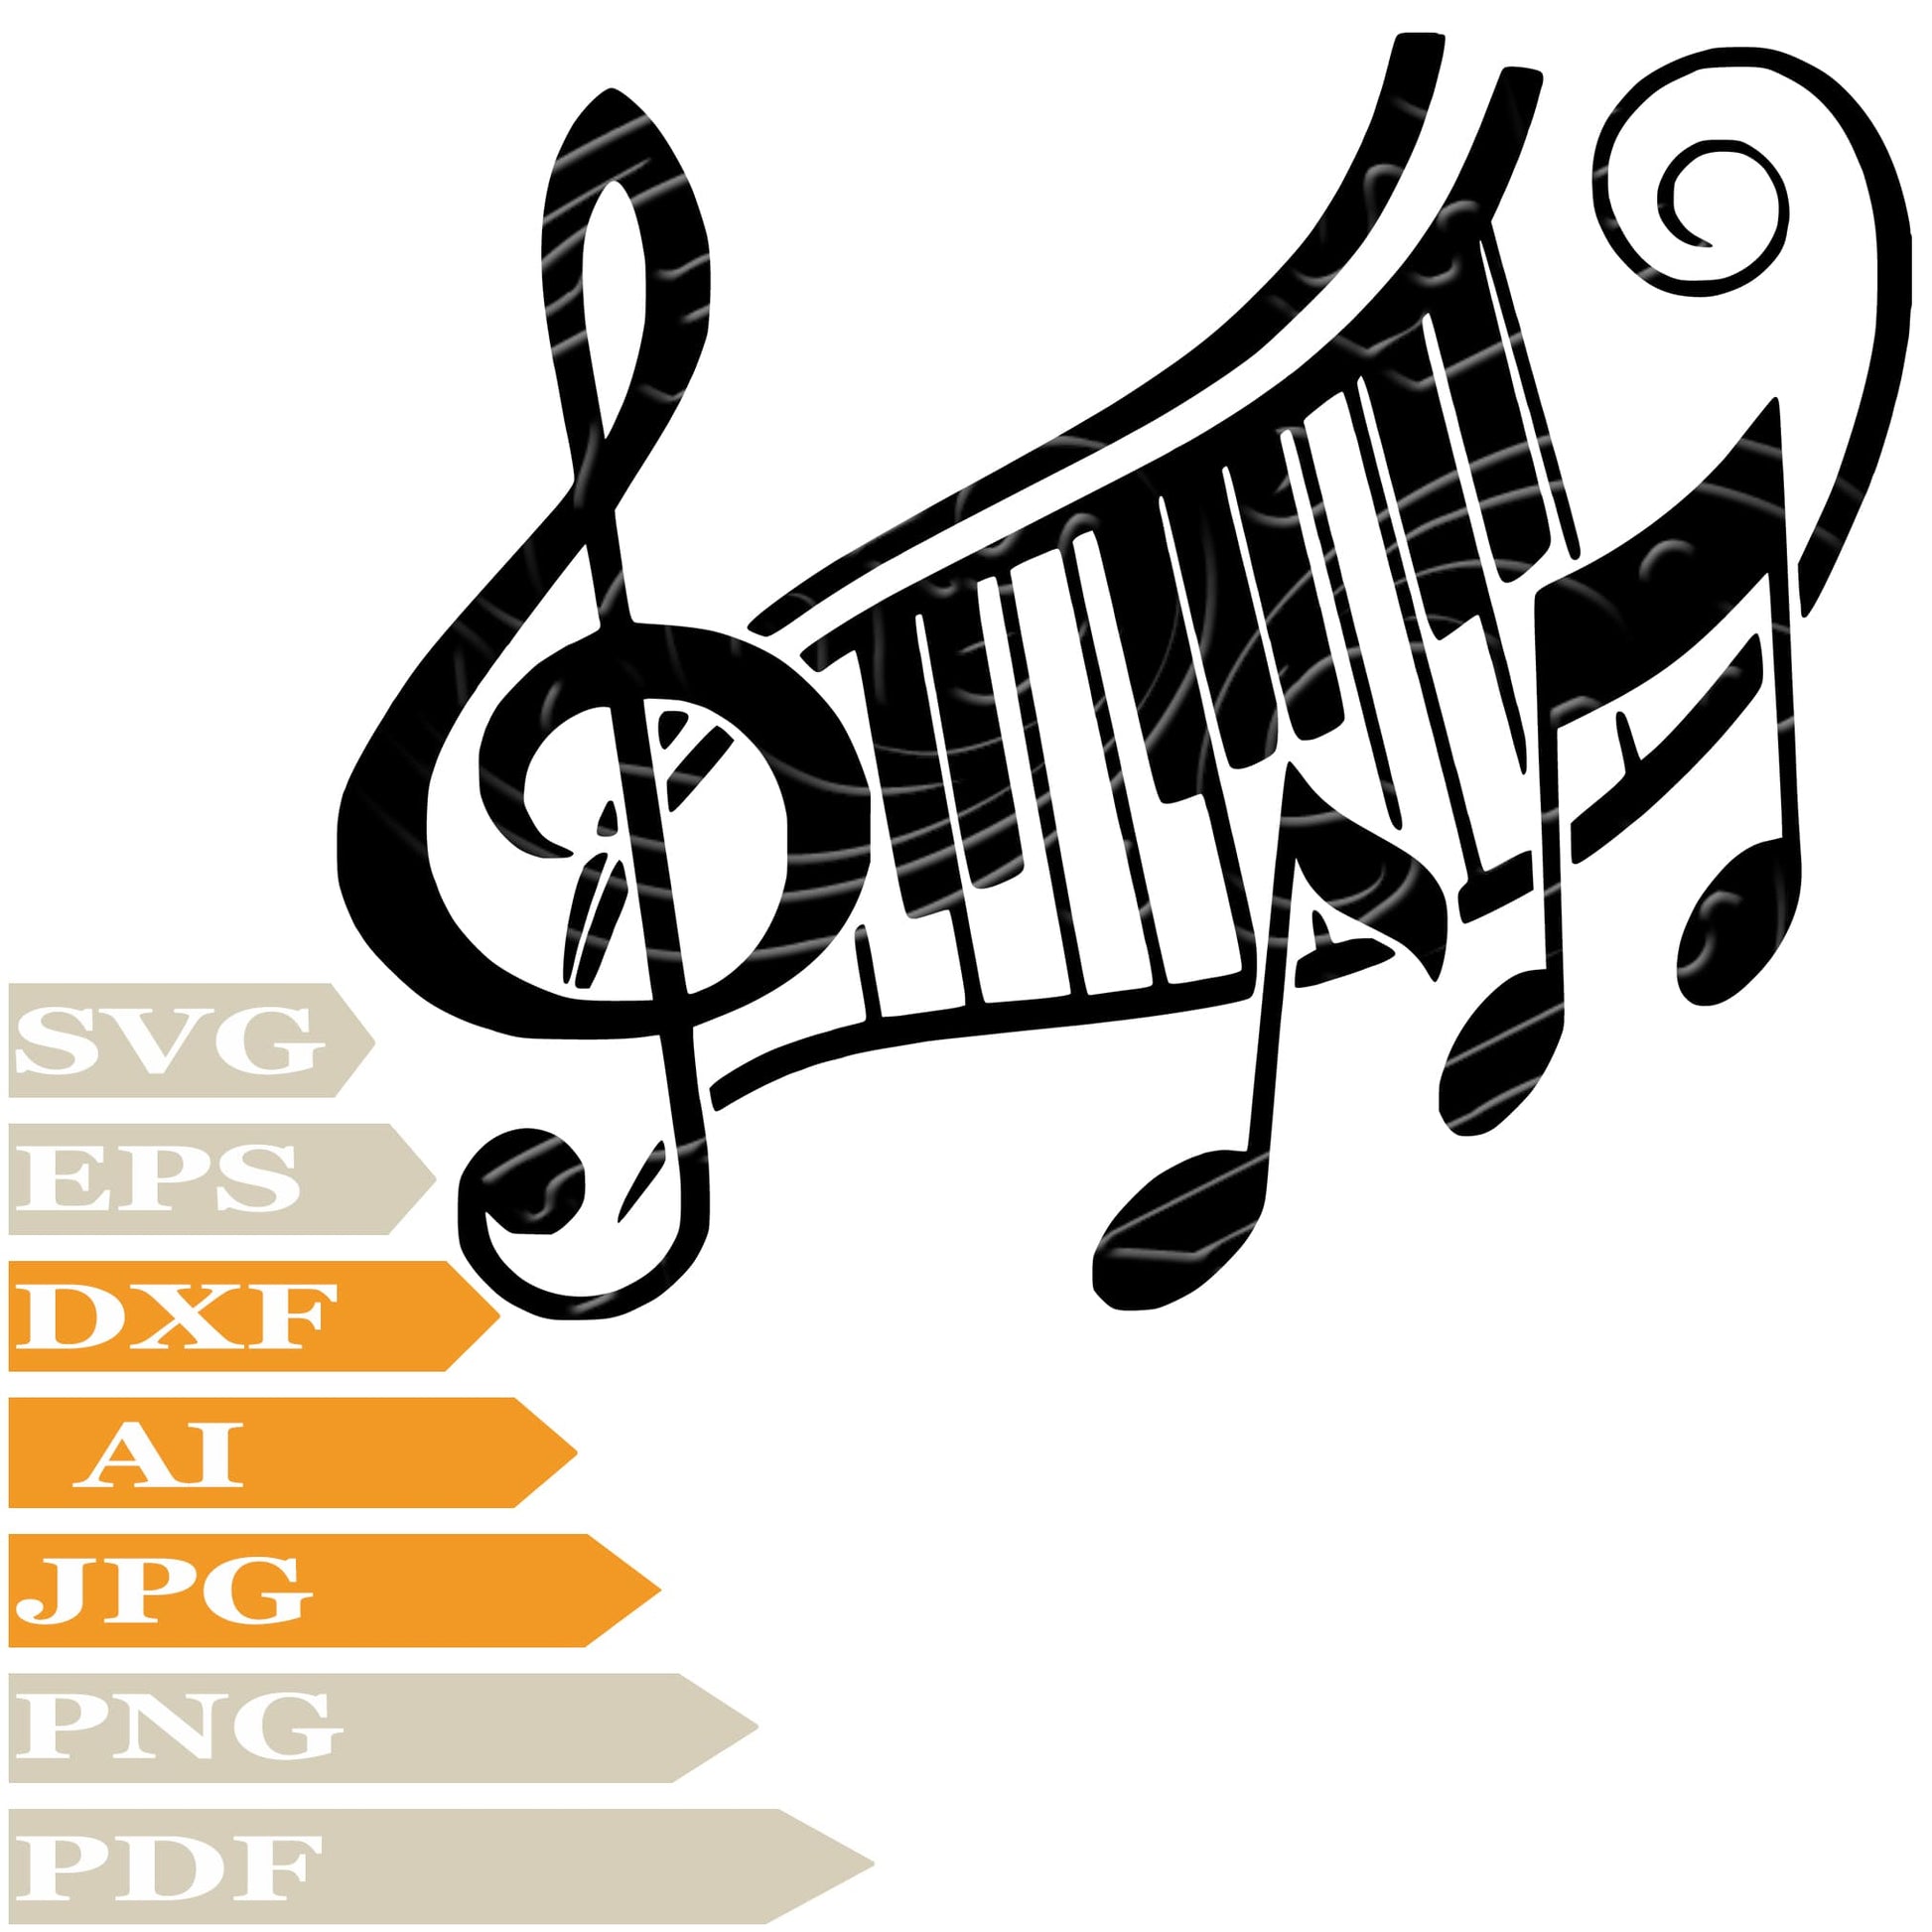 Piano Keyboard, Piano Keyboard With Music Notes Svg File, Image Cut, Png, For Tattoo, Silhouette, Digital Vector Download, Cut File, Clipart, For Cricut